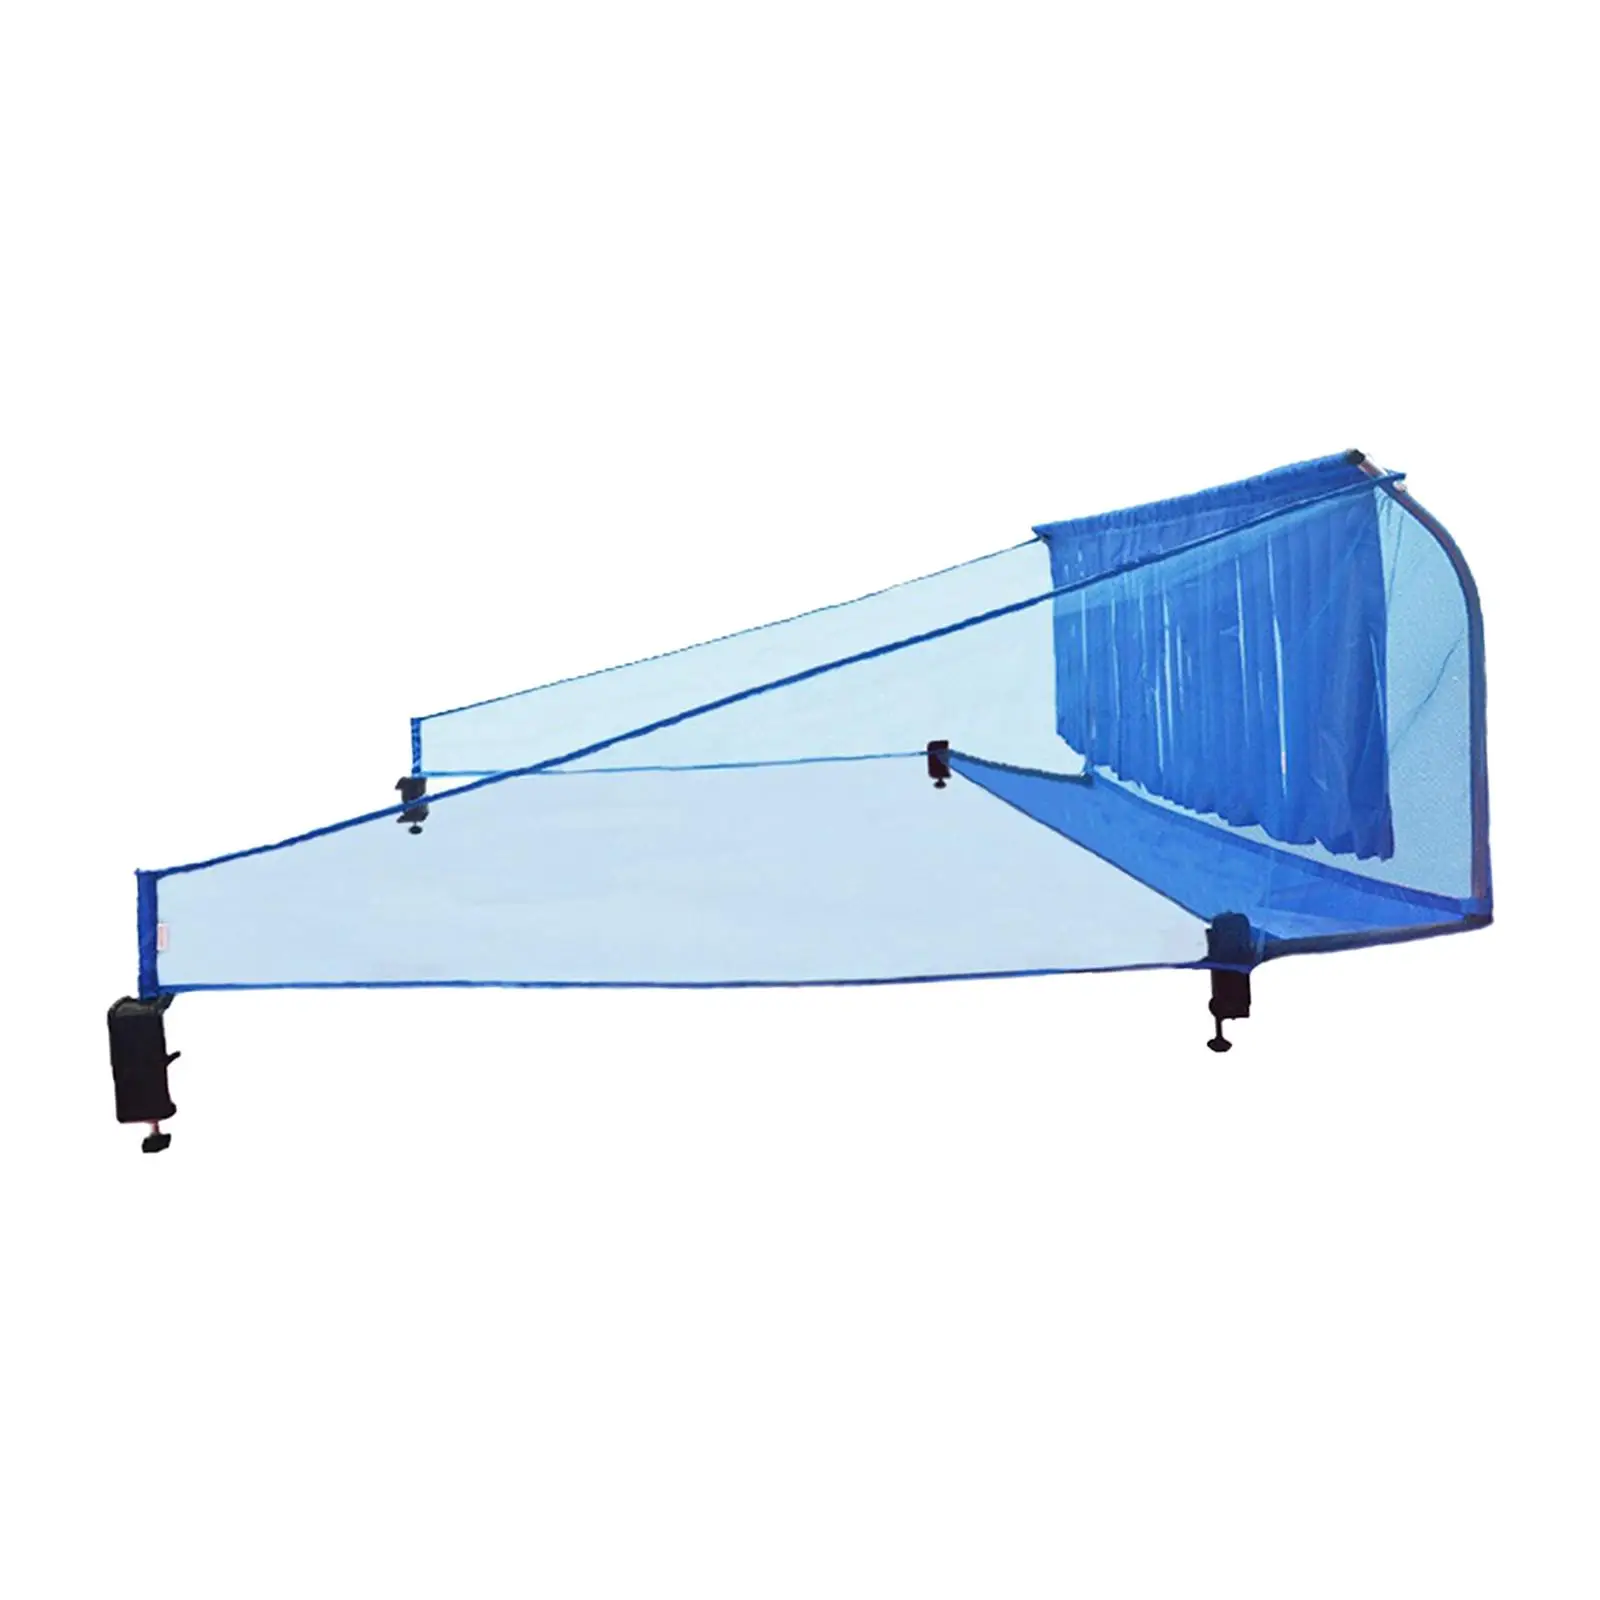 Table Tennis Ball Net Collector with Stainless Steel Frames Lightweight Ball Recycle Catcher Equipment Collection Net